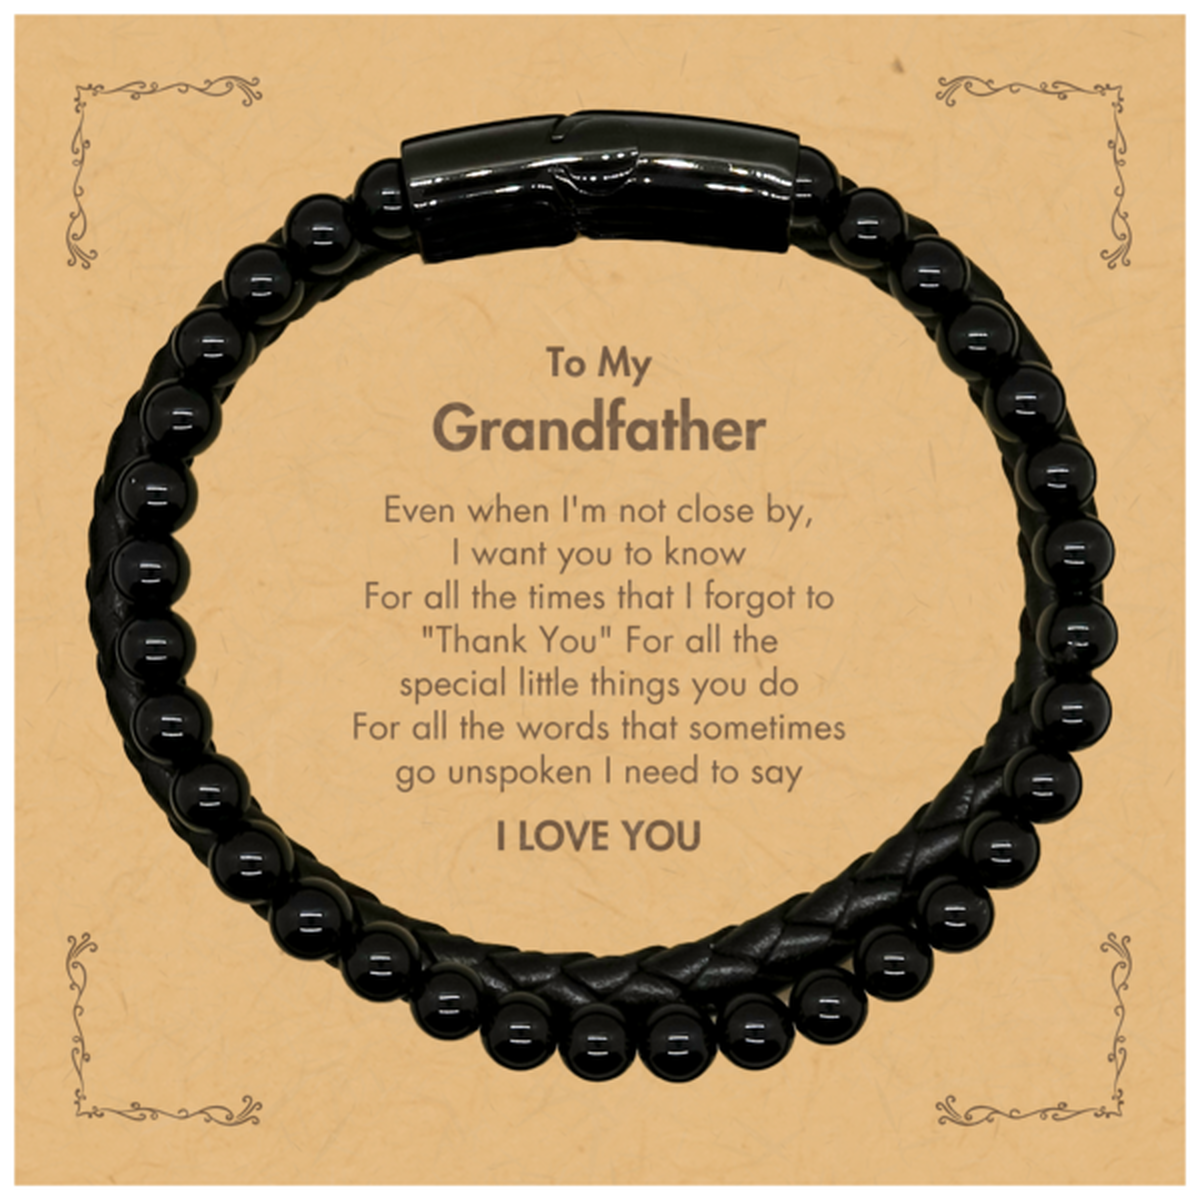 Thank You Gifts for Grandfather, Keepsake Stone Leather Bracelets Gifts for Grandfather Birthday Mother's day Father's Day Grandfather For all the words That sometimes go unspoken I need to say I LOVE YOU